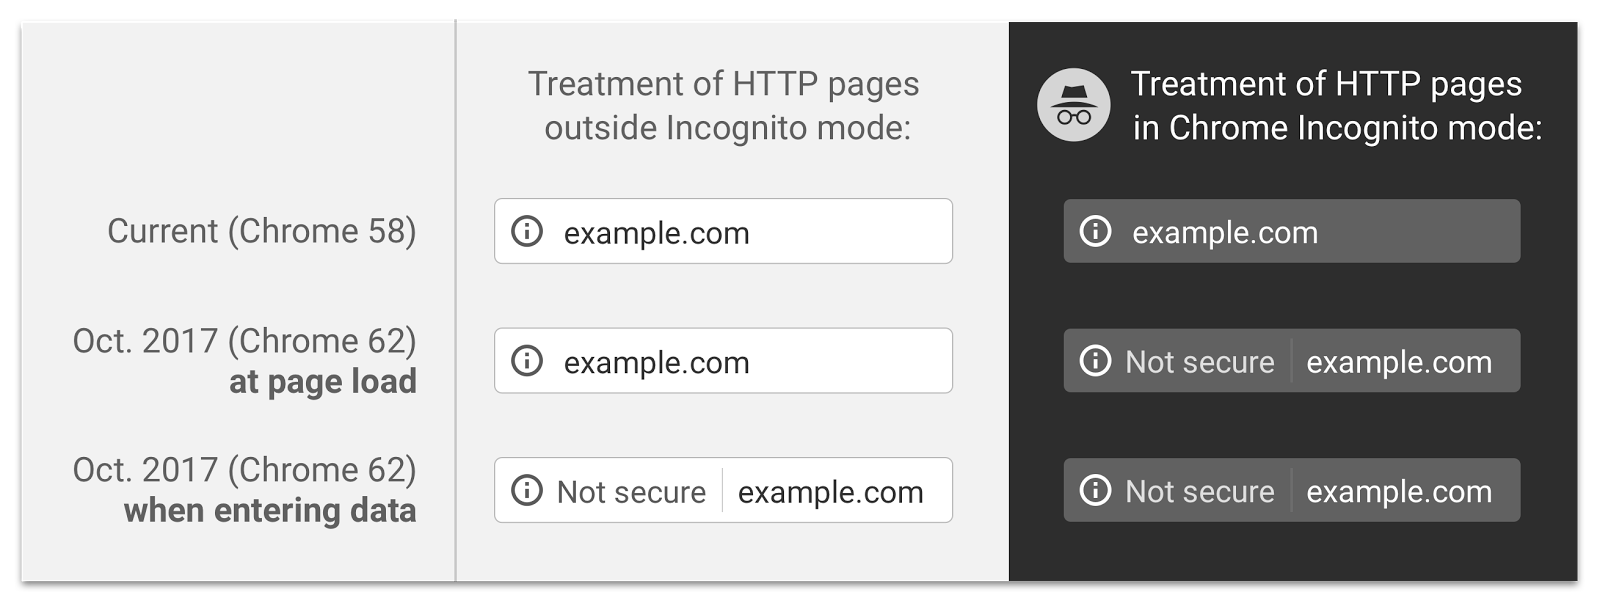 Chrome 62 showing more "Not secure" warnings